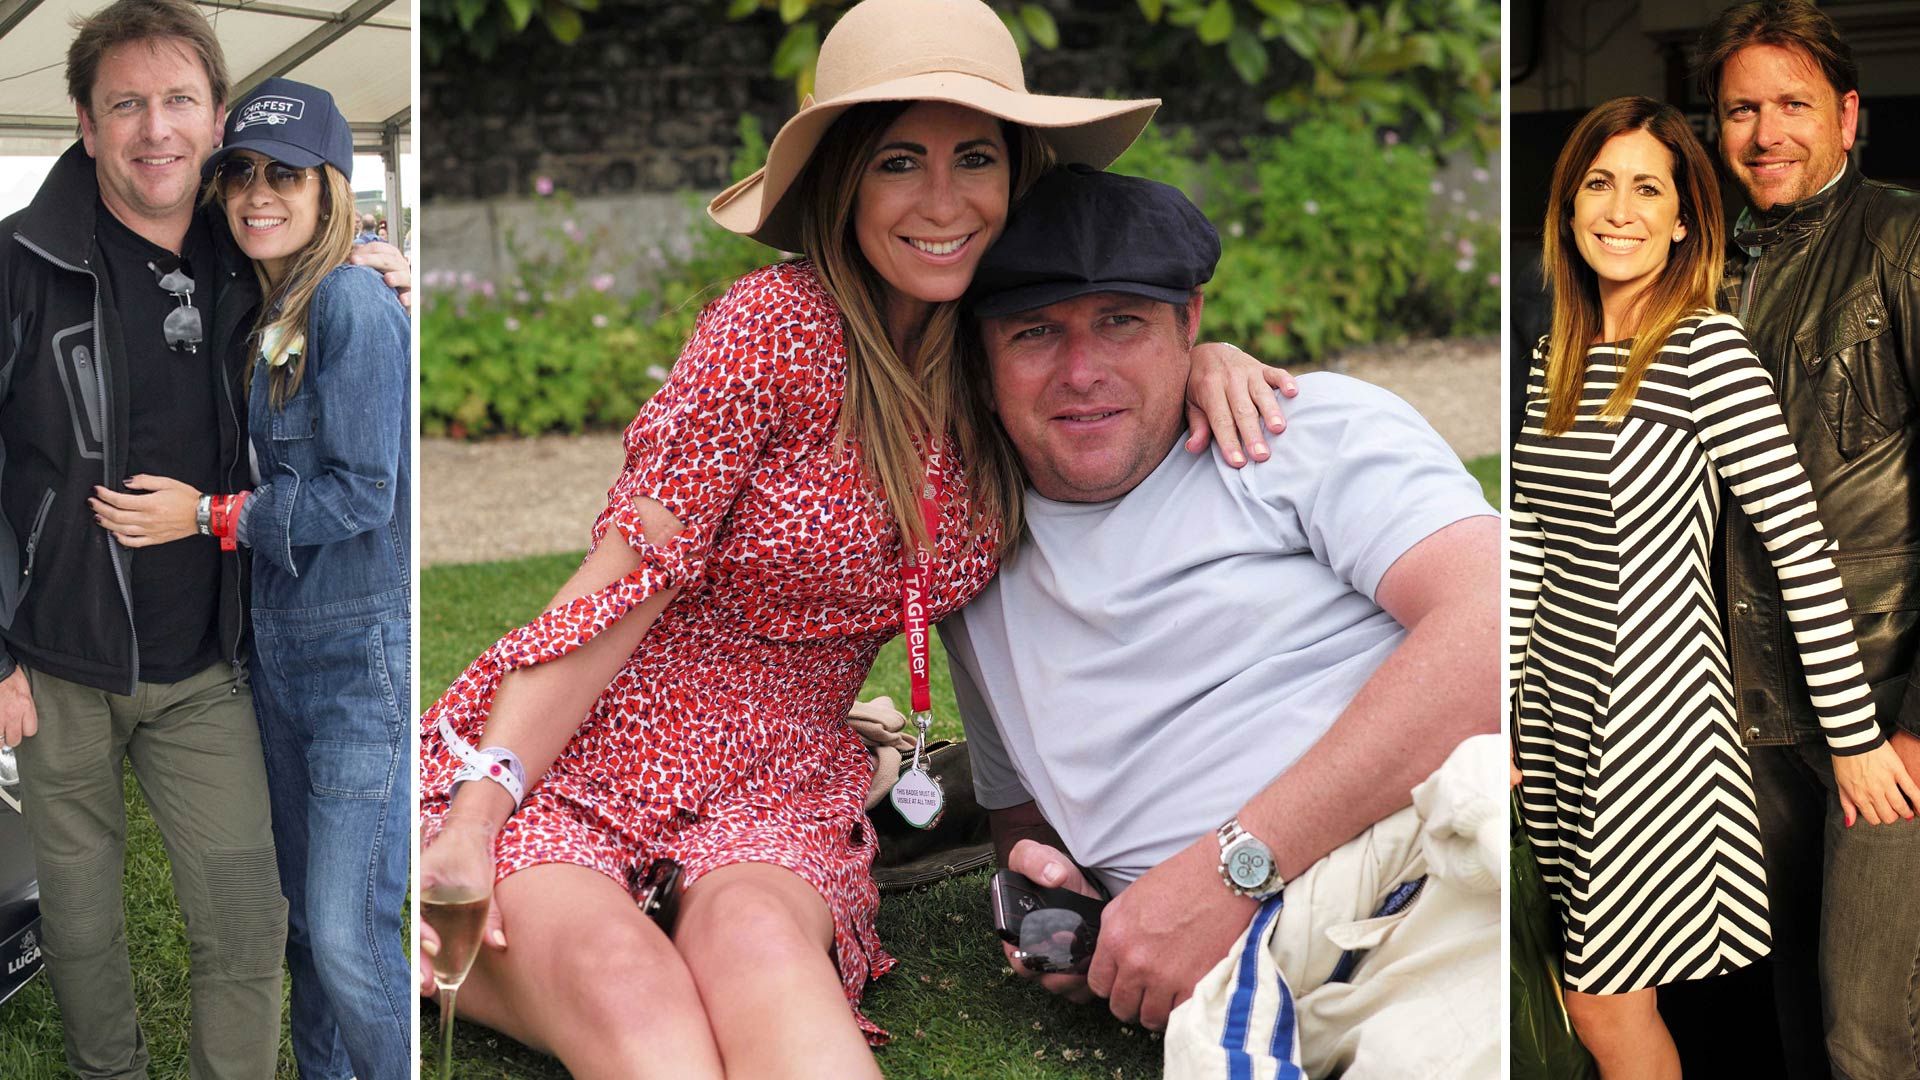 James Martin's rare PDAs with his girlfriend Louise